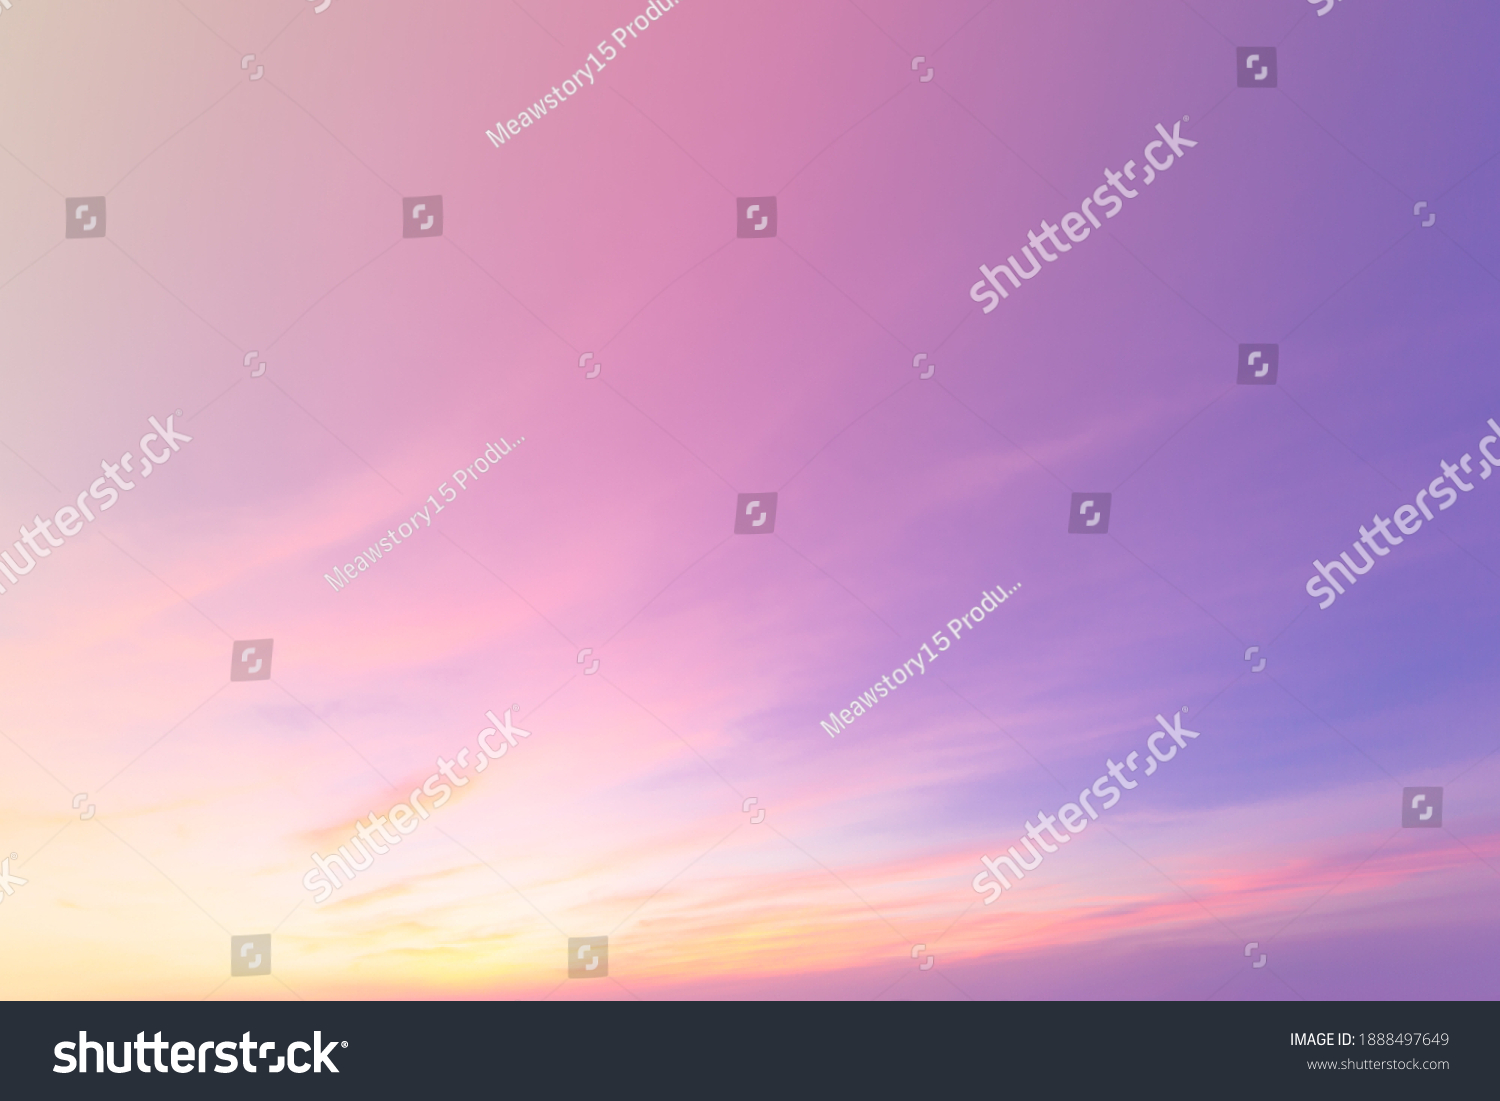 A soft clouds in the pastel colored gradient for background #1888497649